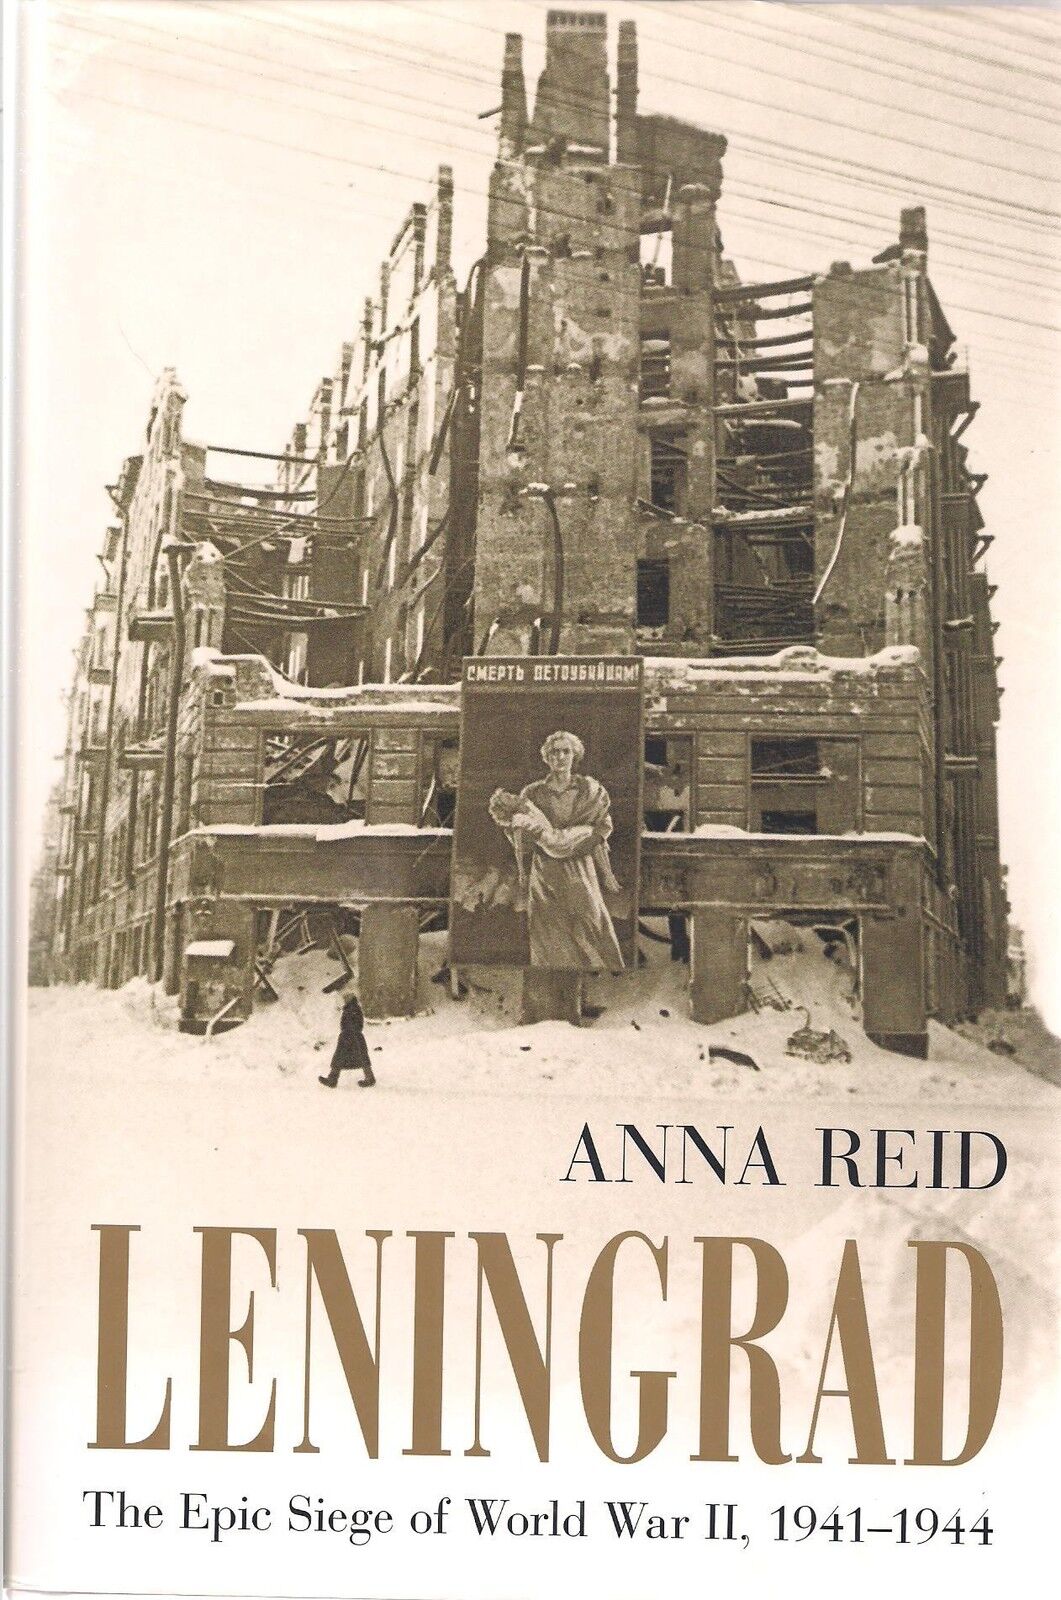 Leningrad by Anna Reid (The Epic Siege Of WWII 1941-1944)